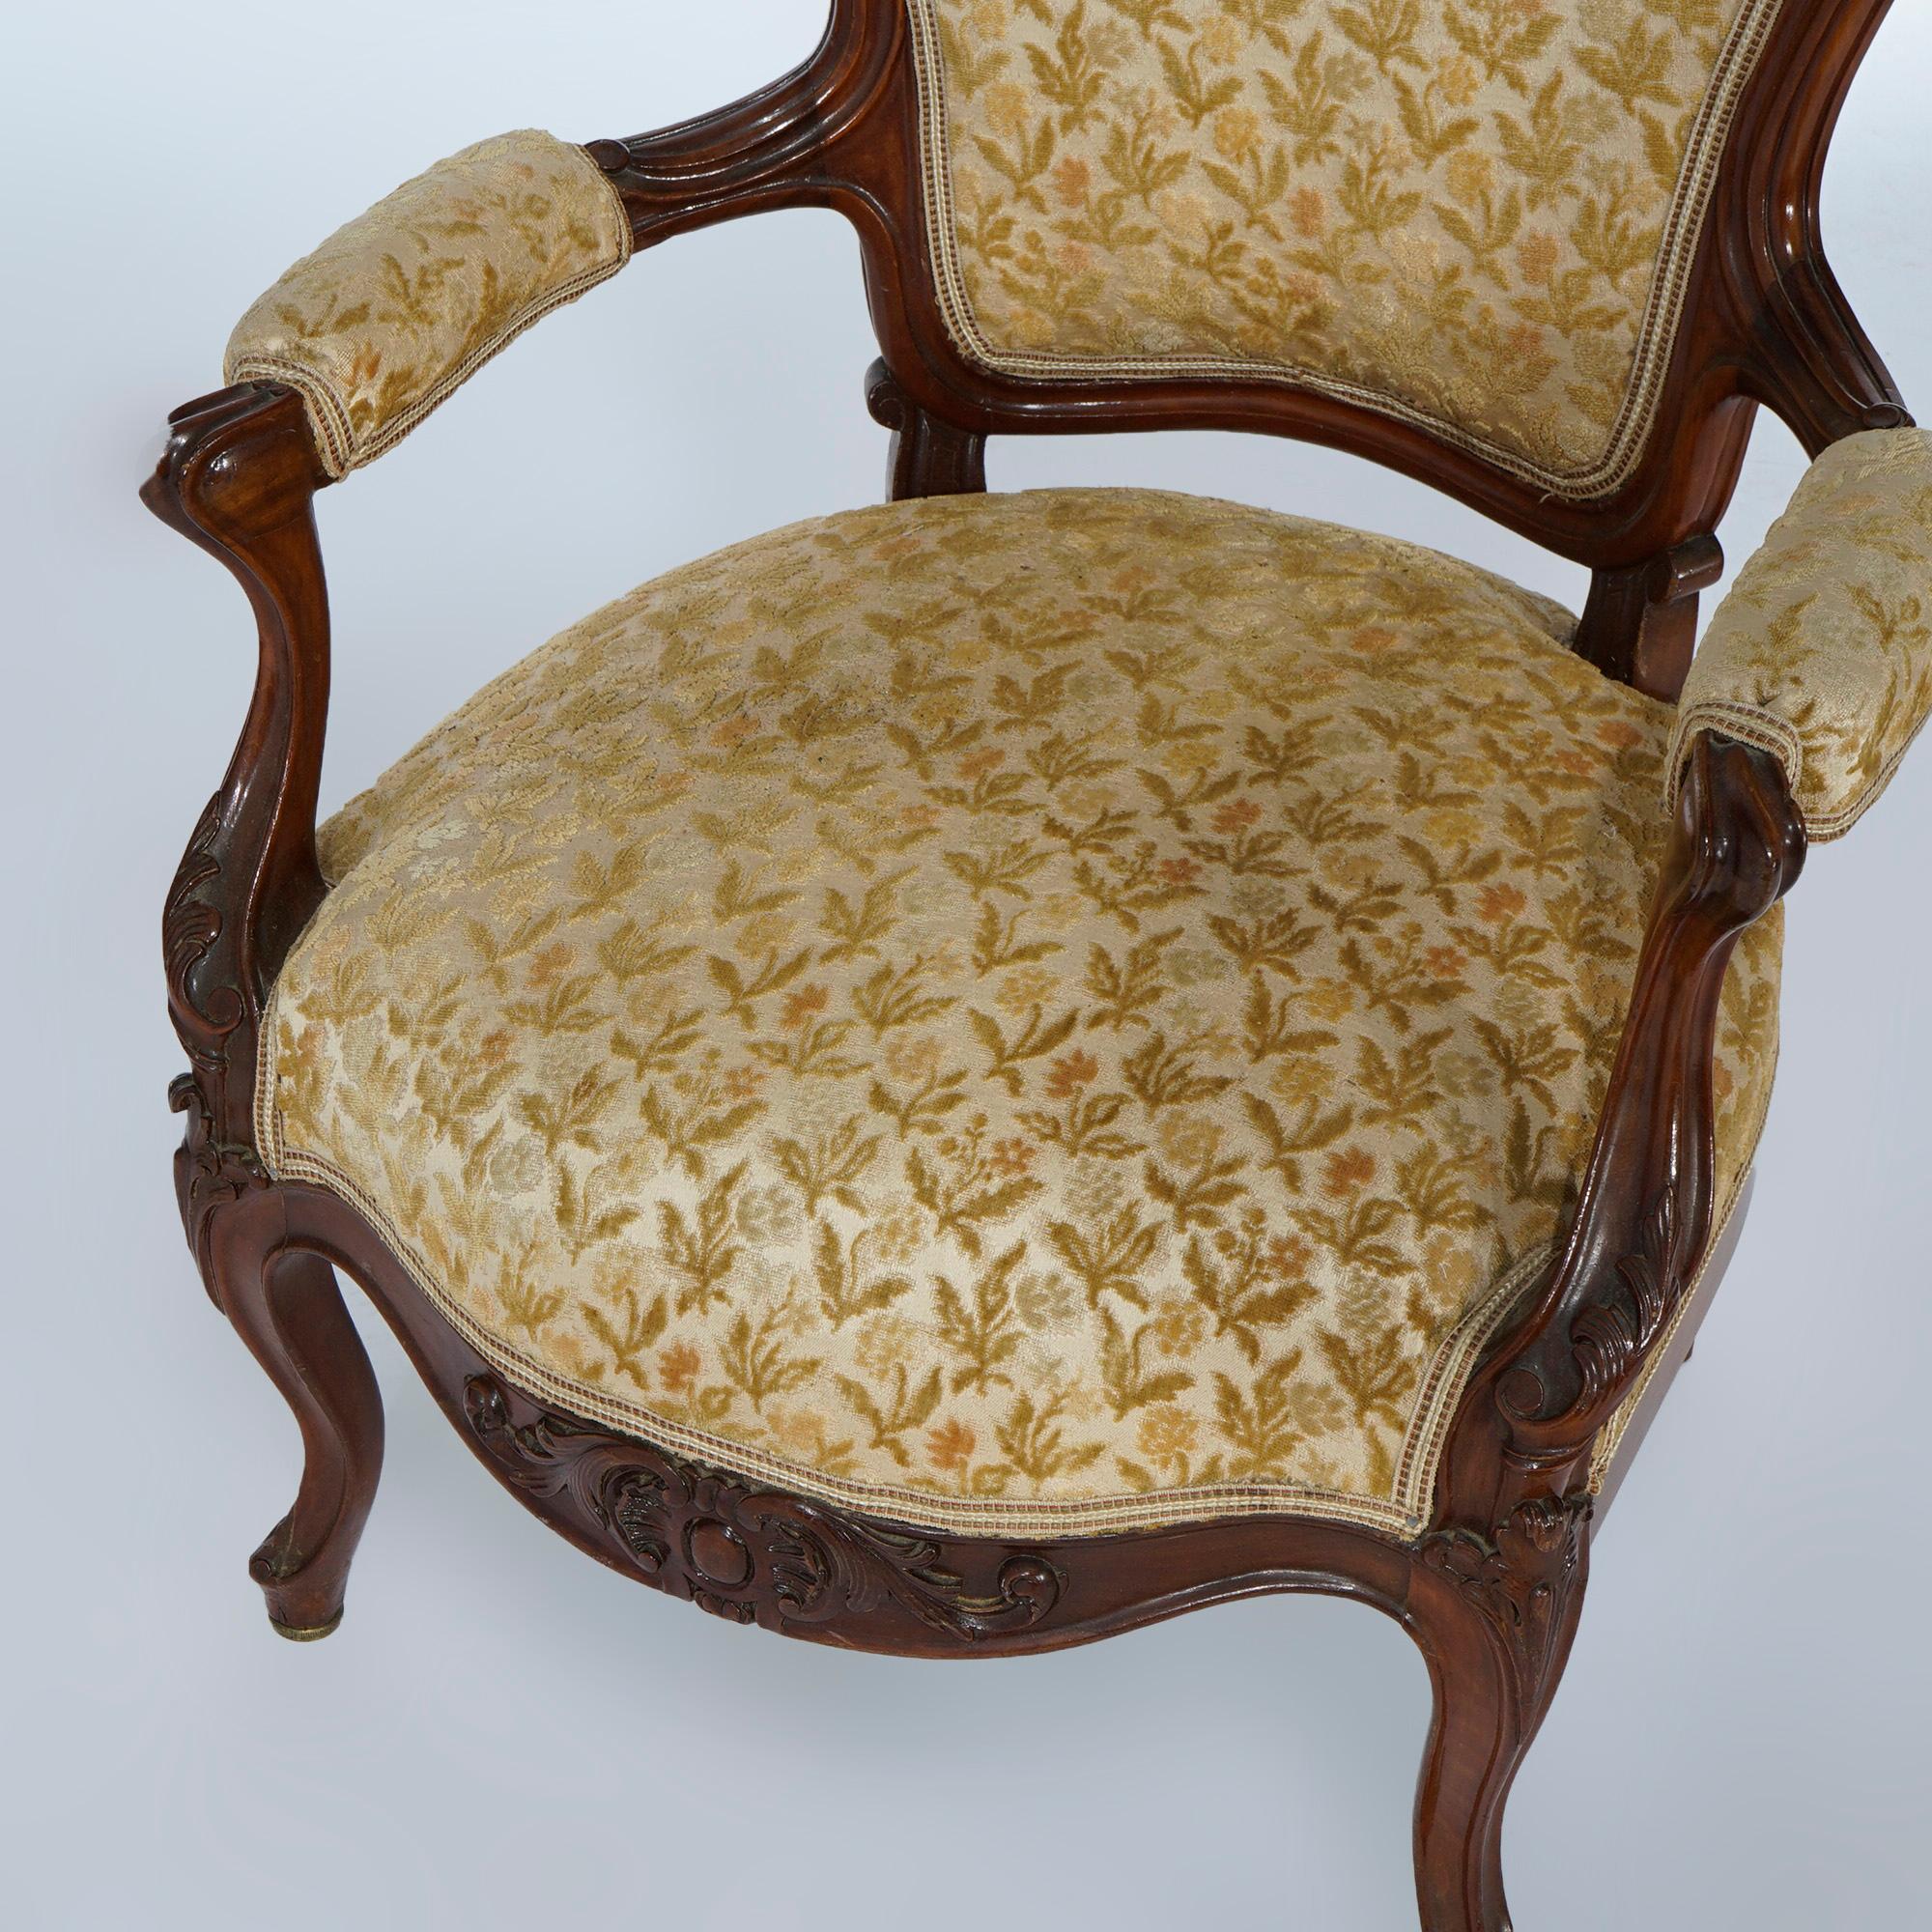 Upholstery Antique Victorian Upholstered Carved Walnut Parlor Arm Chair, c1890